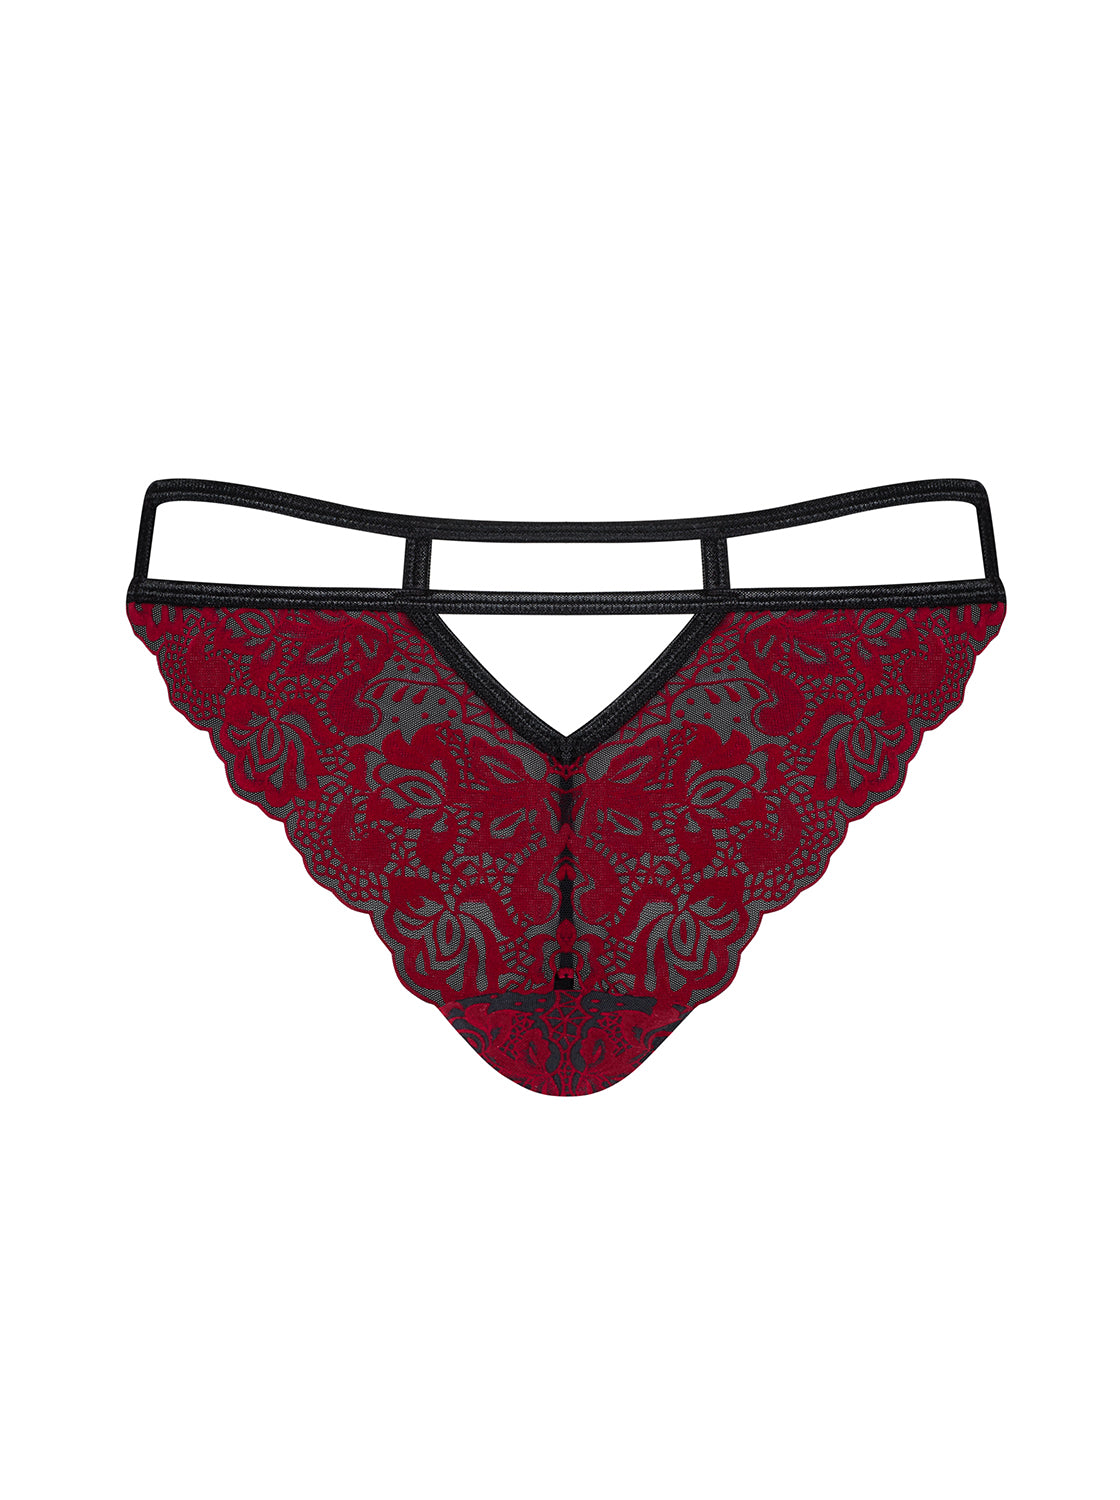 Sugestina an elegant panty in black with red velvet pattern and an extraordinary strap design